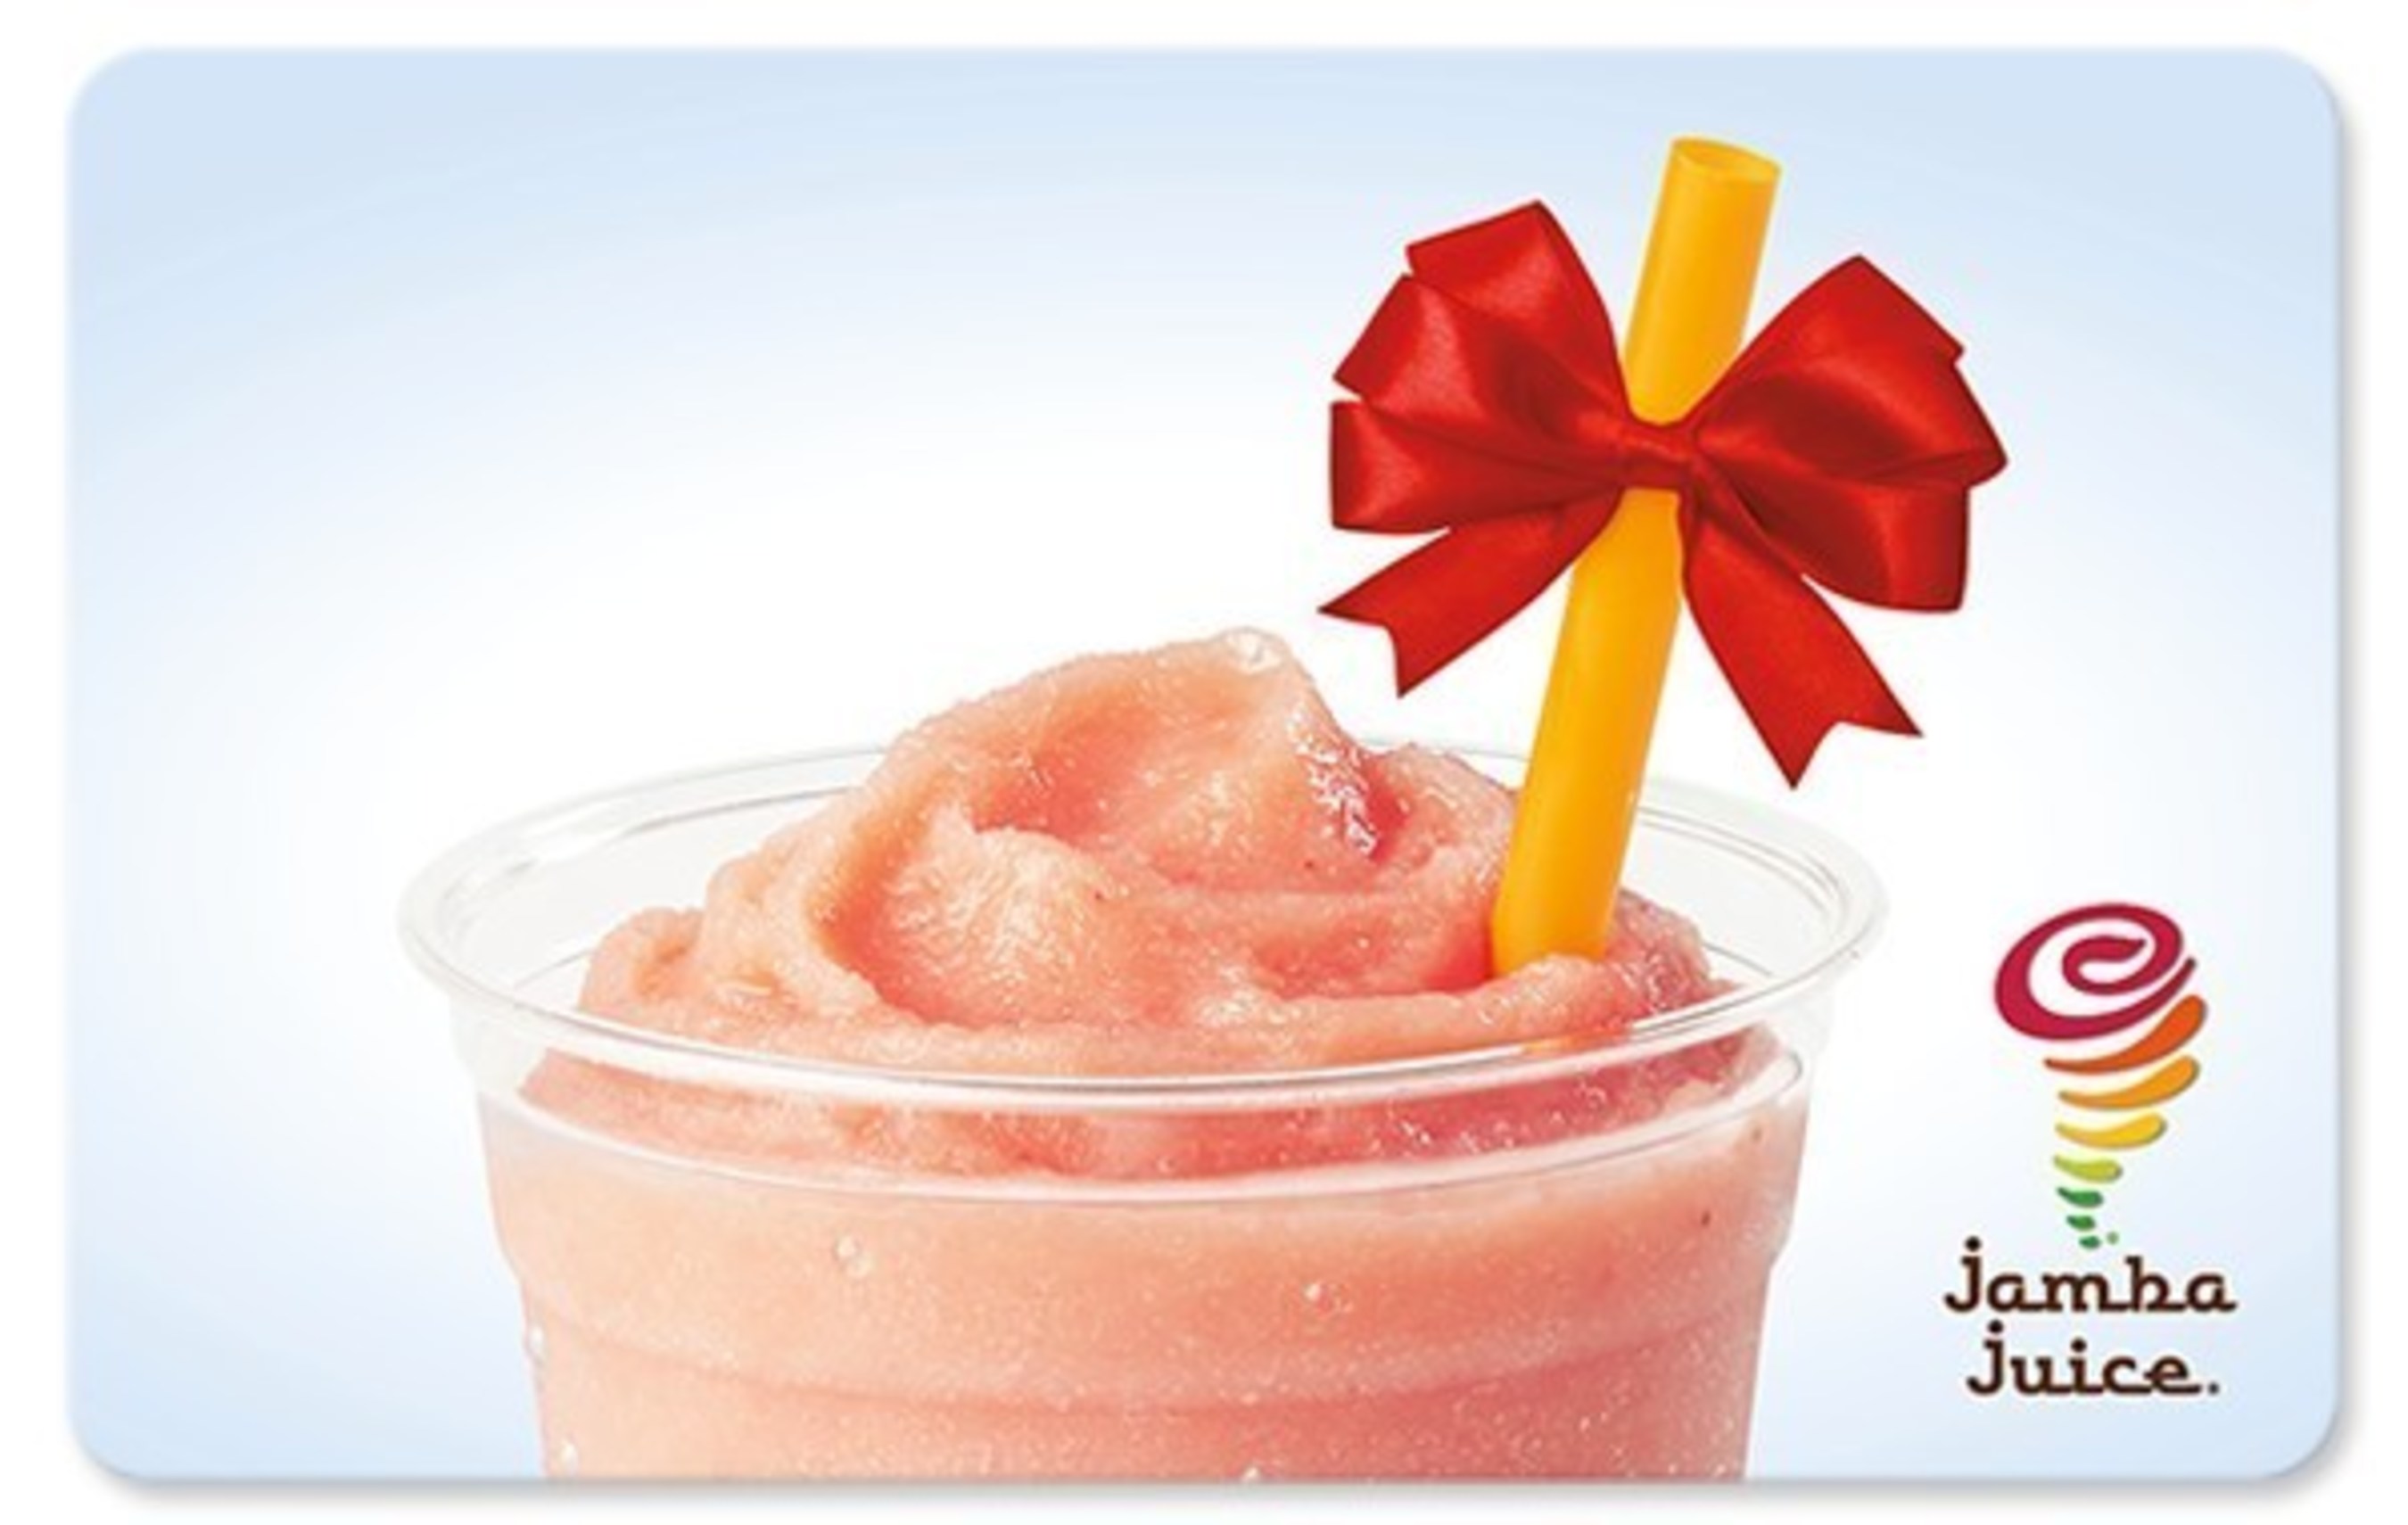 To kick off the holiday season, Jamba Juice is launching new Jamba eGifting, as well as returning its special, limited time only gift card promotion that rewards customers who purchase $25.00 or more in Jamba Juice gift cards with a free small size smoothie or 12oz juice.